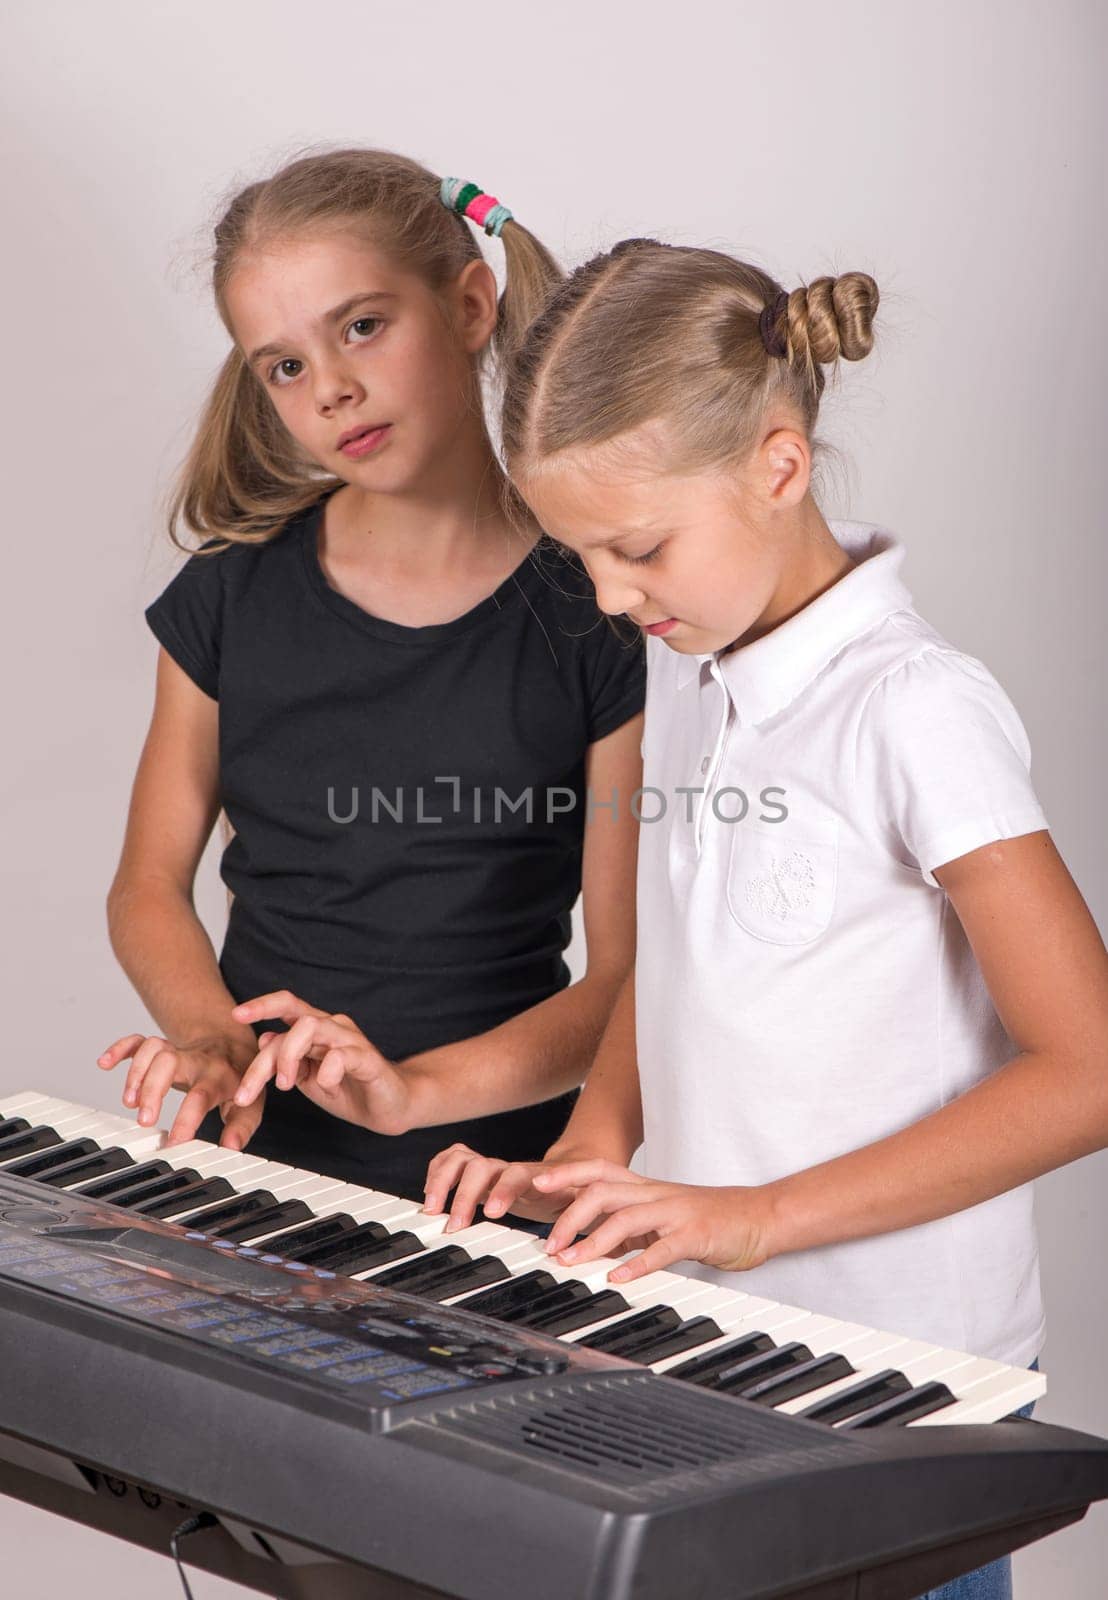 Two girls playing piano. Kids play music. Classical education for children. art lesson. Little girl at digital keyboard. Instrument for young student. Music class in school or at home. by aprilphoto